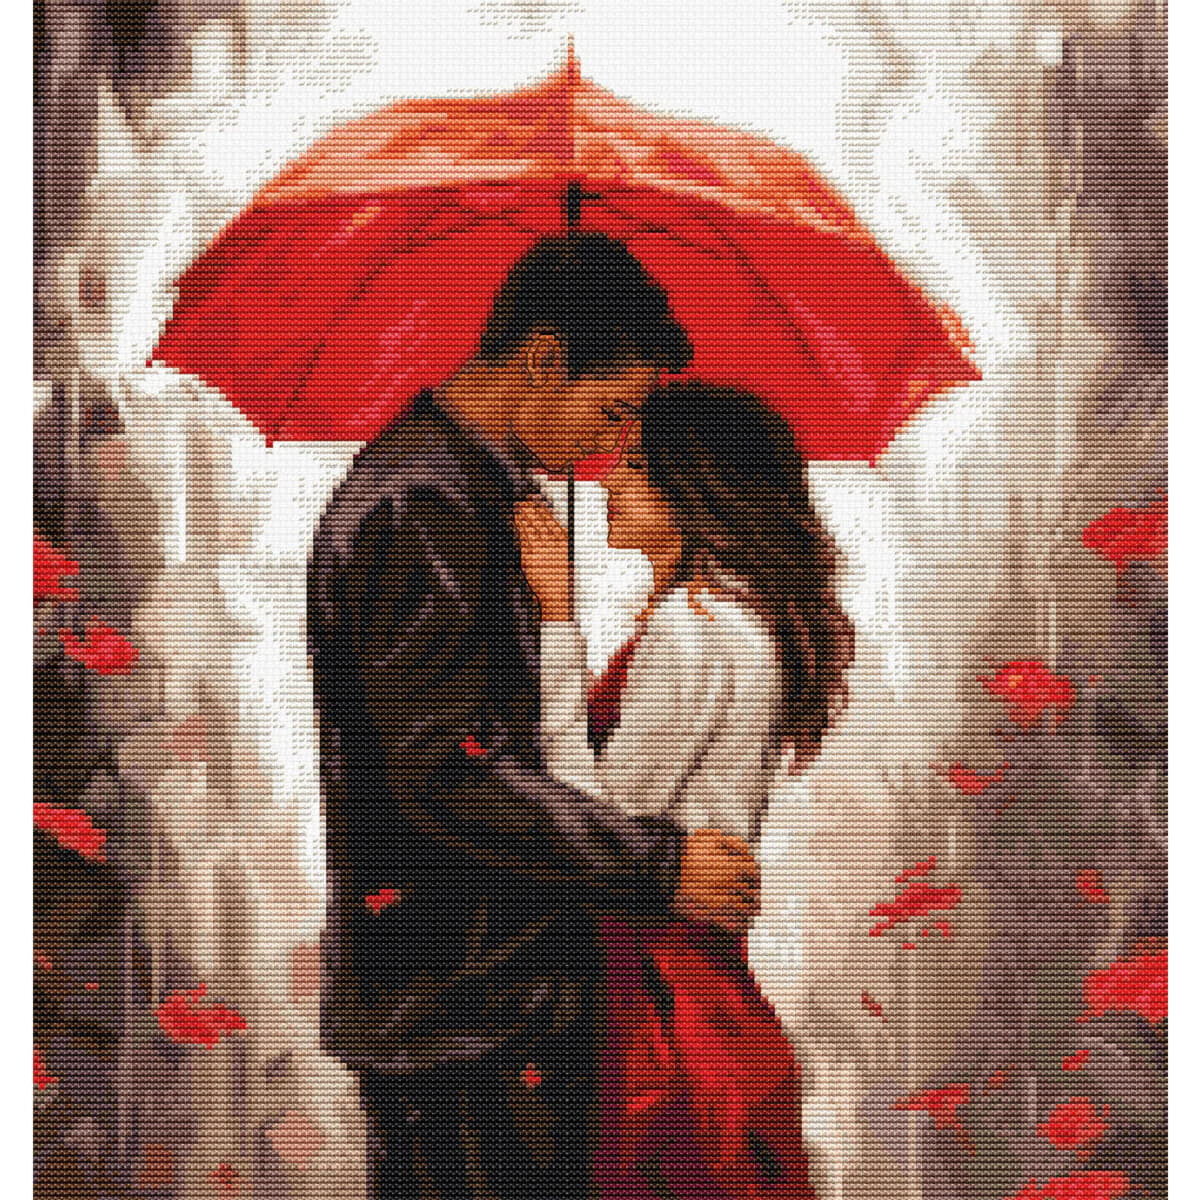 A painted depiction of a couple standing close together...